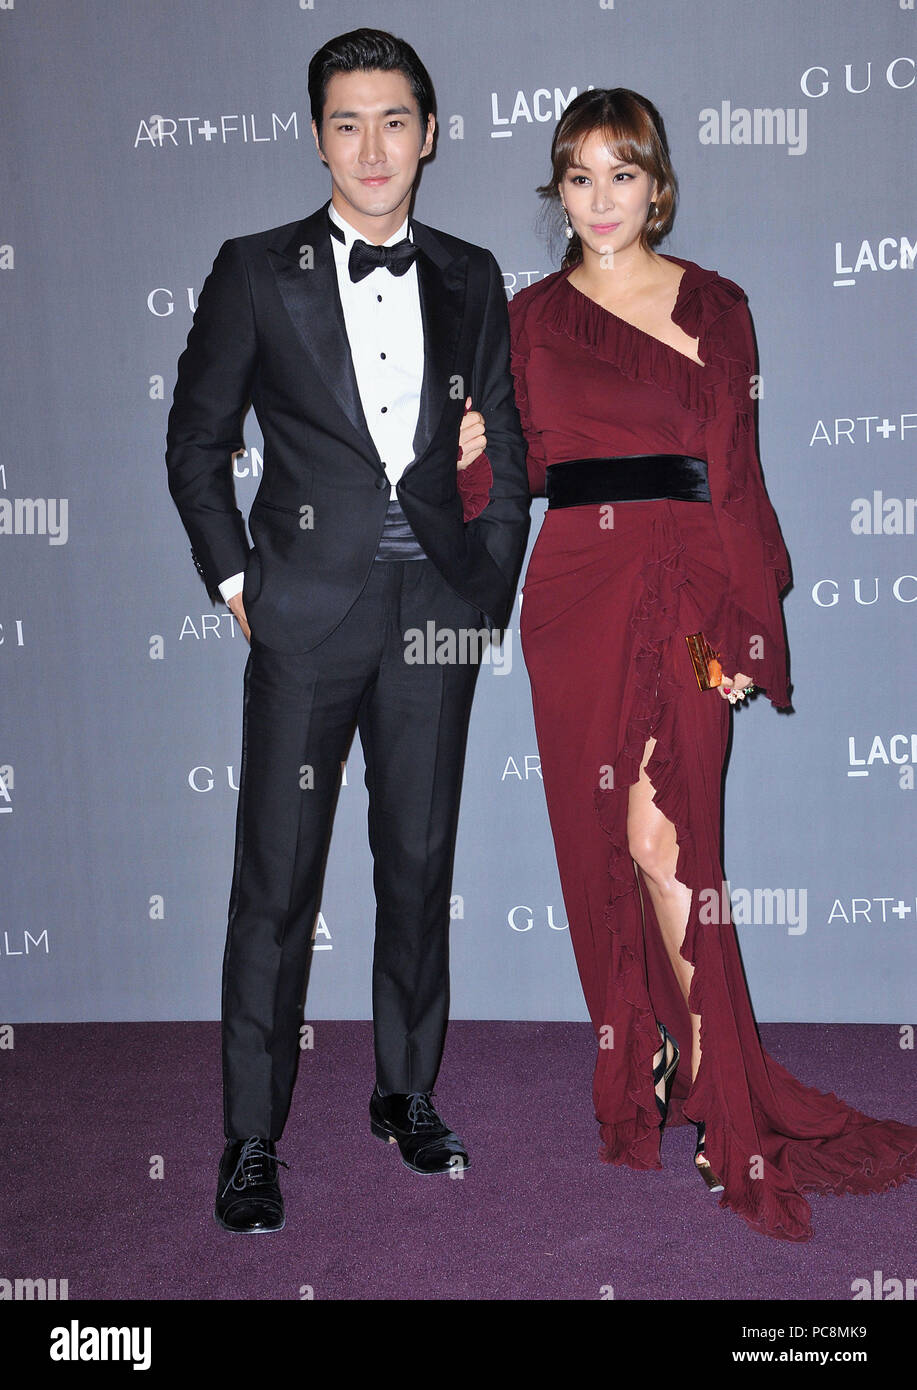 Choi Siwon  at the LACMA 2012 Art Film Gala at the LACMA Museum in Los Angeles.Choi Siwon  145 ------------- Red Carpet Event, Vertical, USA, Film Industry, Celebrities,  Photography, Bestof, Arts Culture and Entertainment, Topix Celebrities fashion /  Vertical, Best of, Event in Hollywood Life - California,  Red Carpet and backstage, USA, Film Industry, Celebrities,  movie celebrities, TV celebrities, Music celebrities, Photography, Bestof, Arts Culture and Entertainment,  Topix, vertical,  family from from the year , 2012, inquiry tsuni@Gamma-USA.com Husband and wife Stock Photo